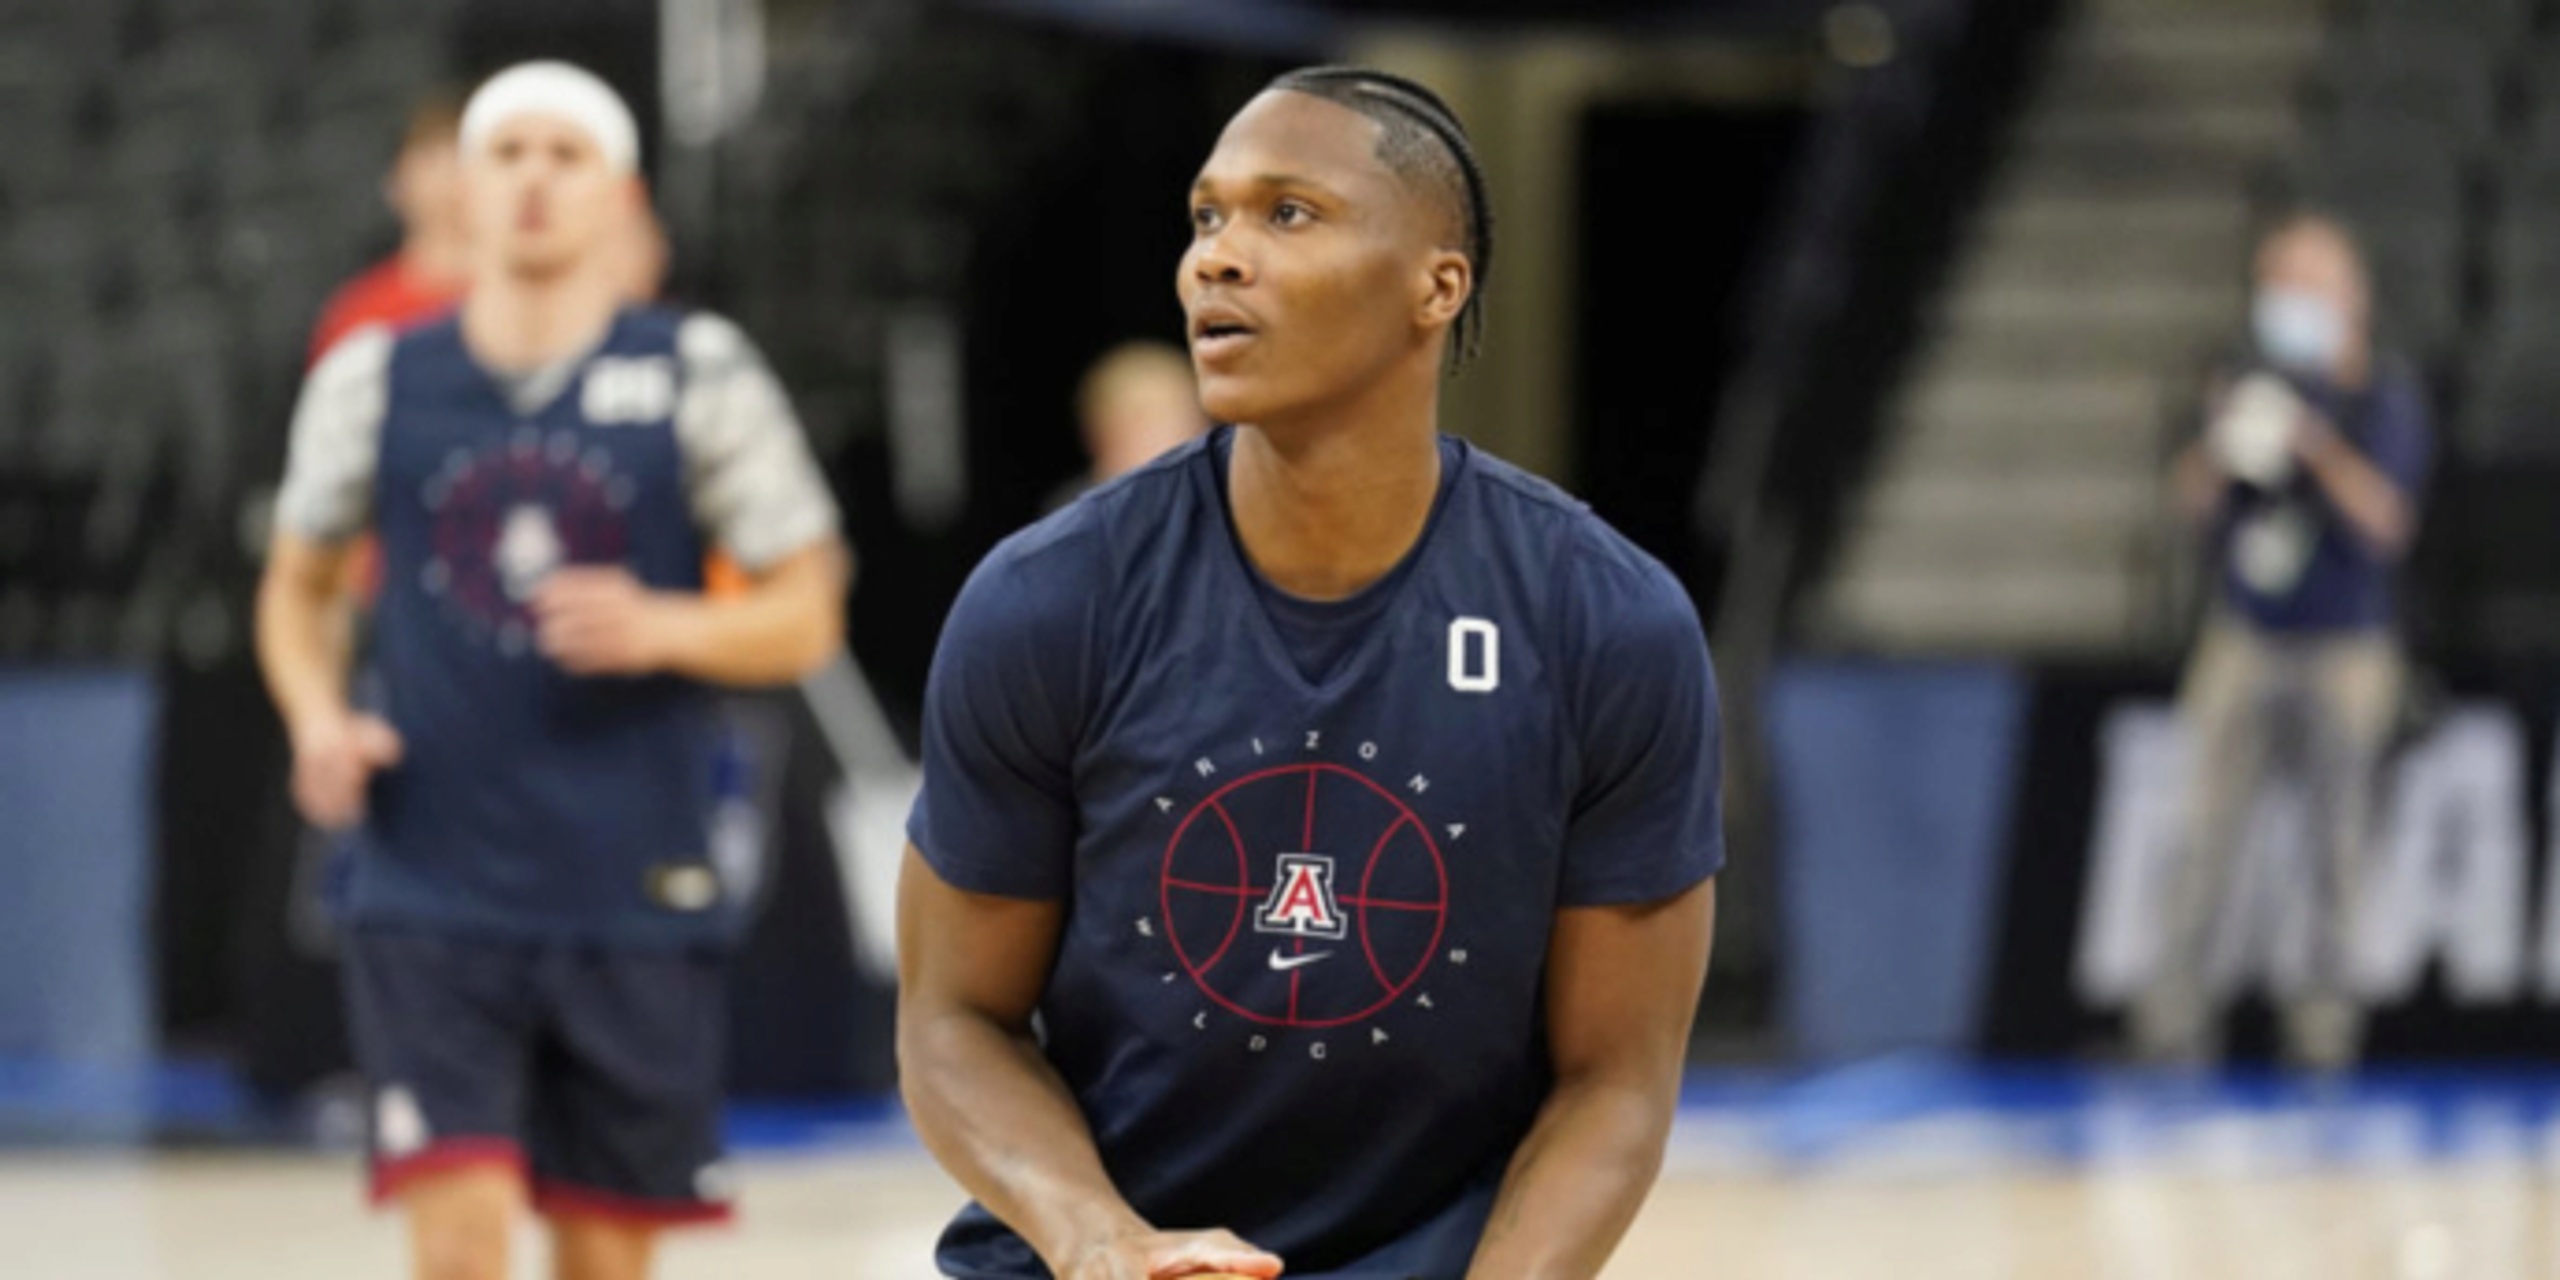 Arizona's Bennedict Mathurin will declare for the 2022 NBA Draft